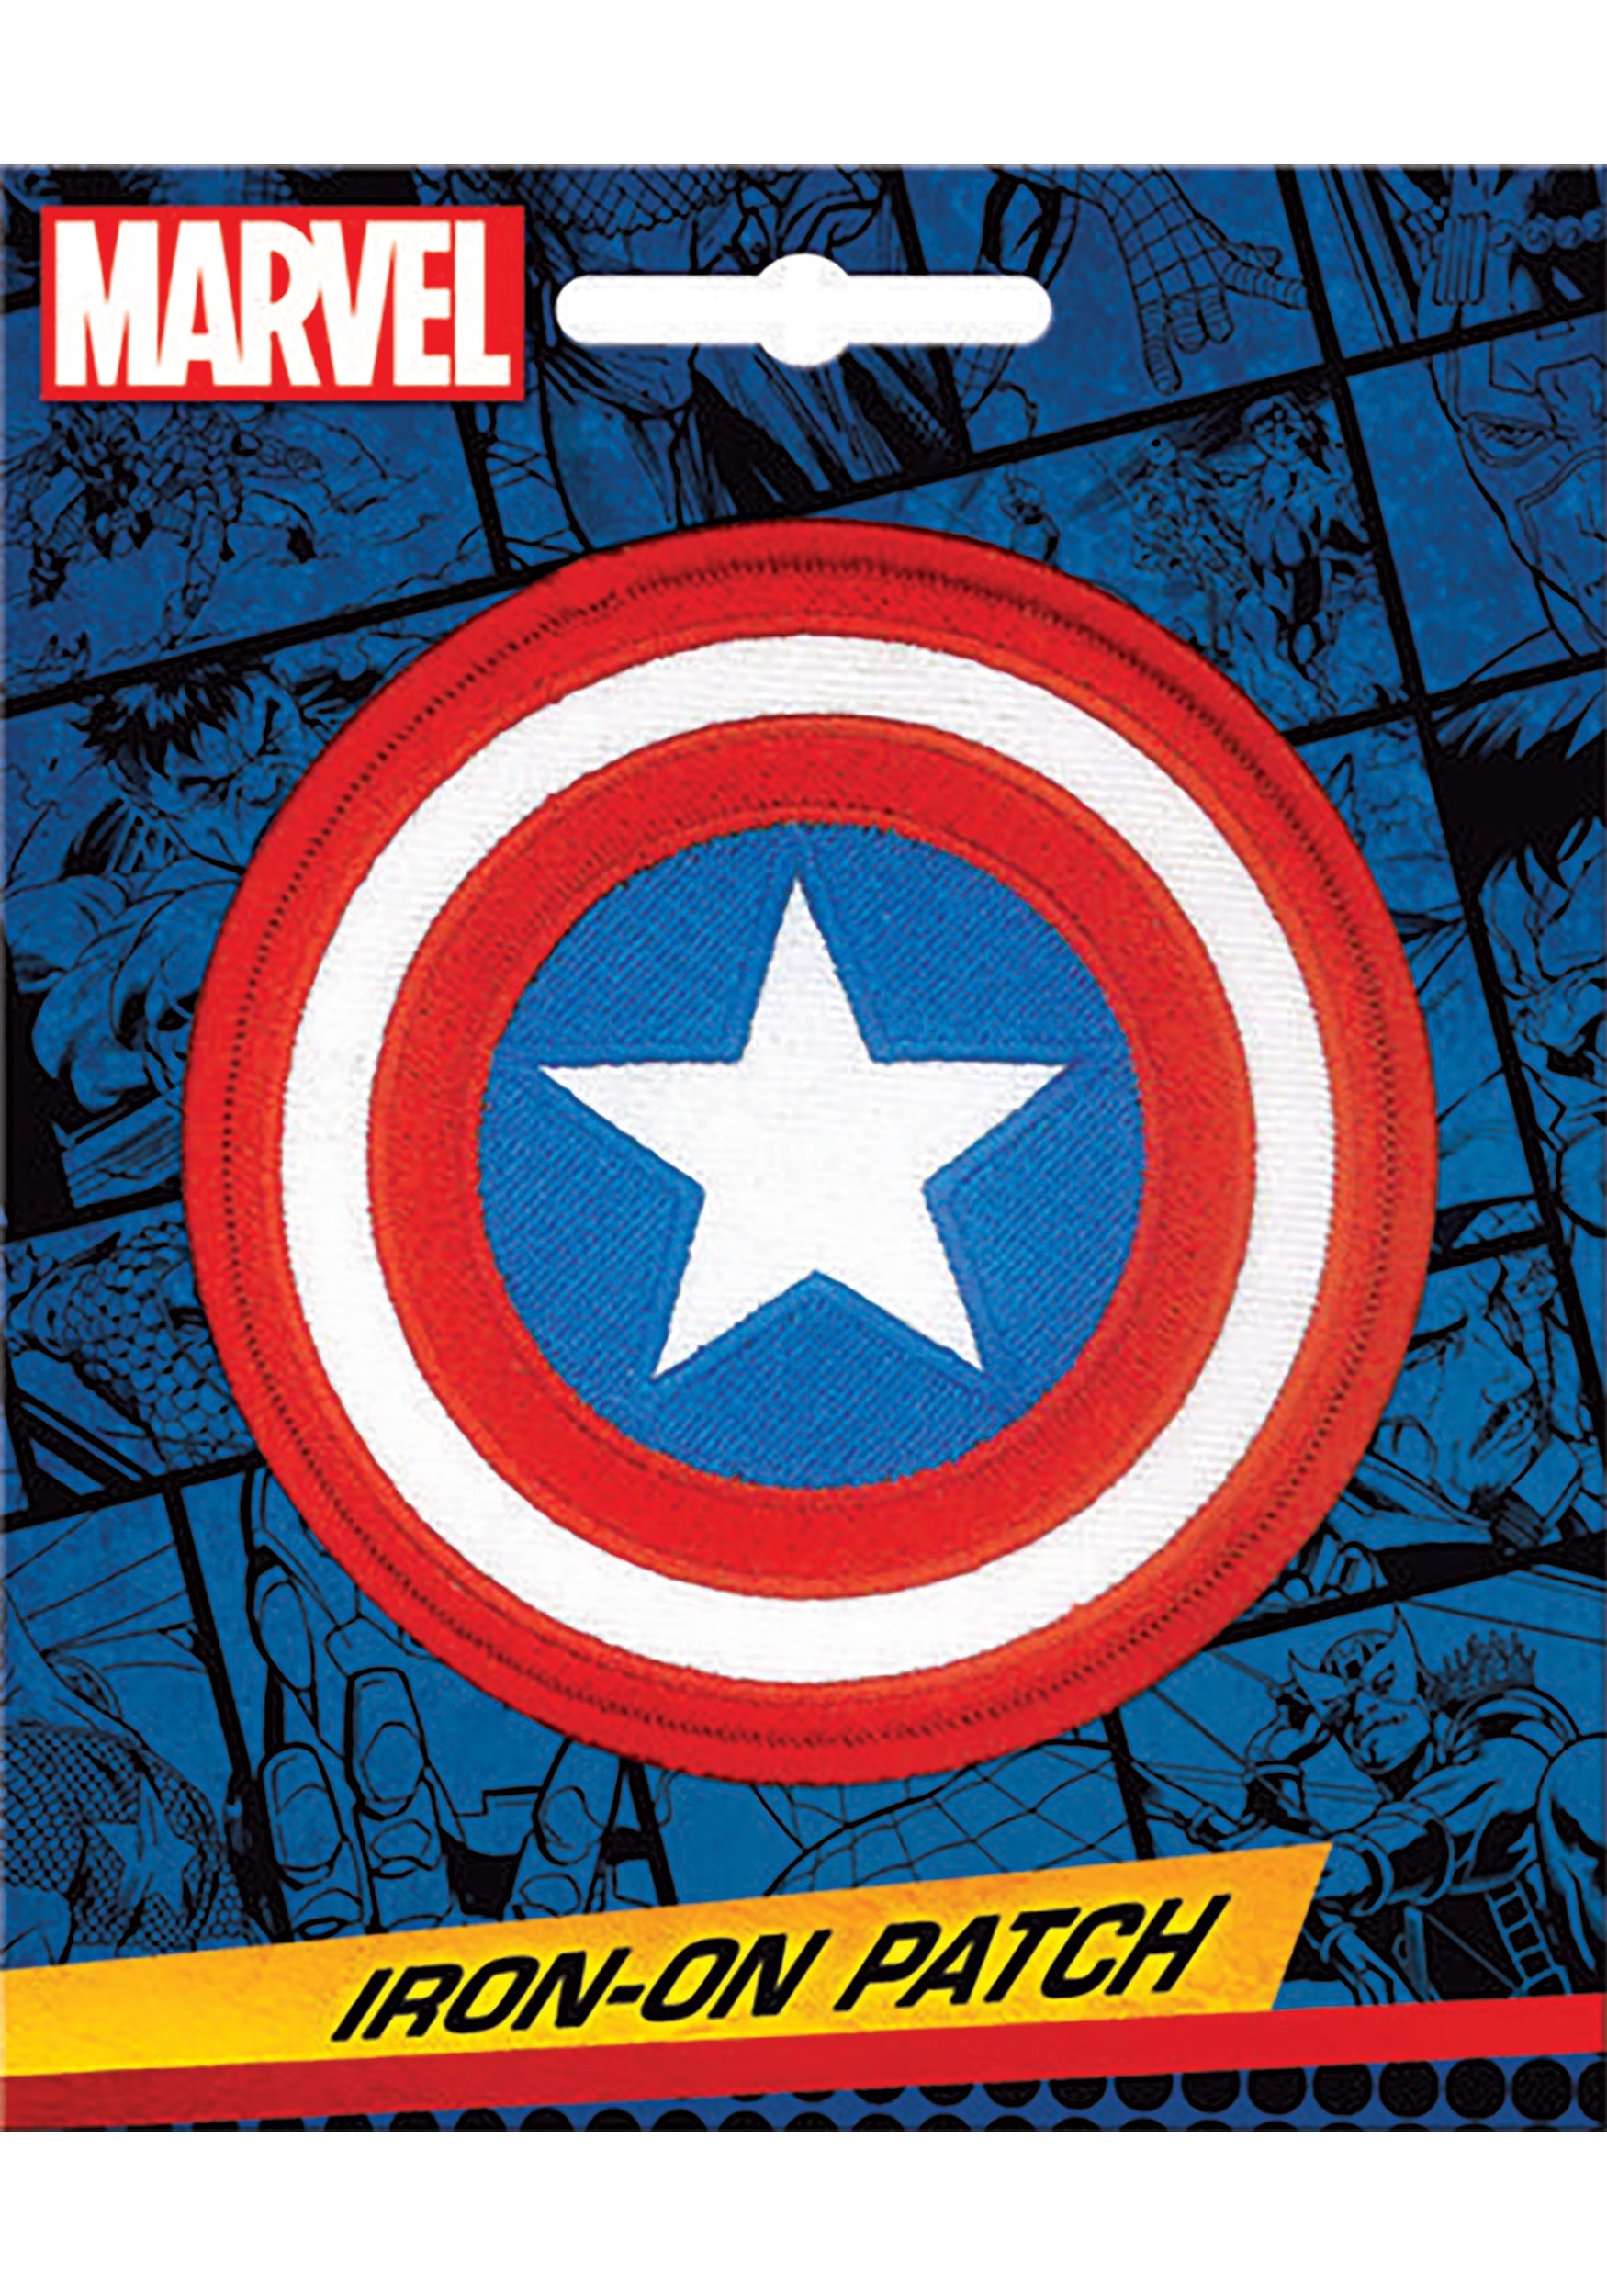 Iron-On Marvel Captain America Patch